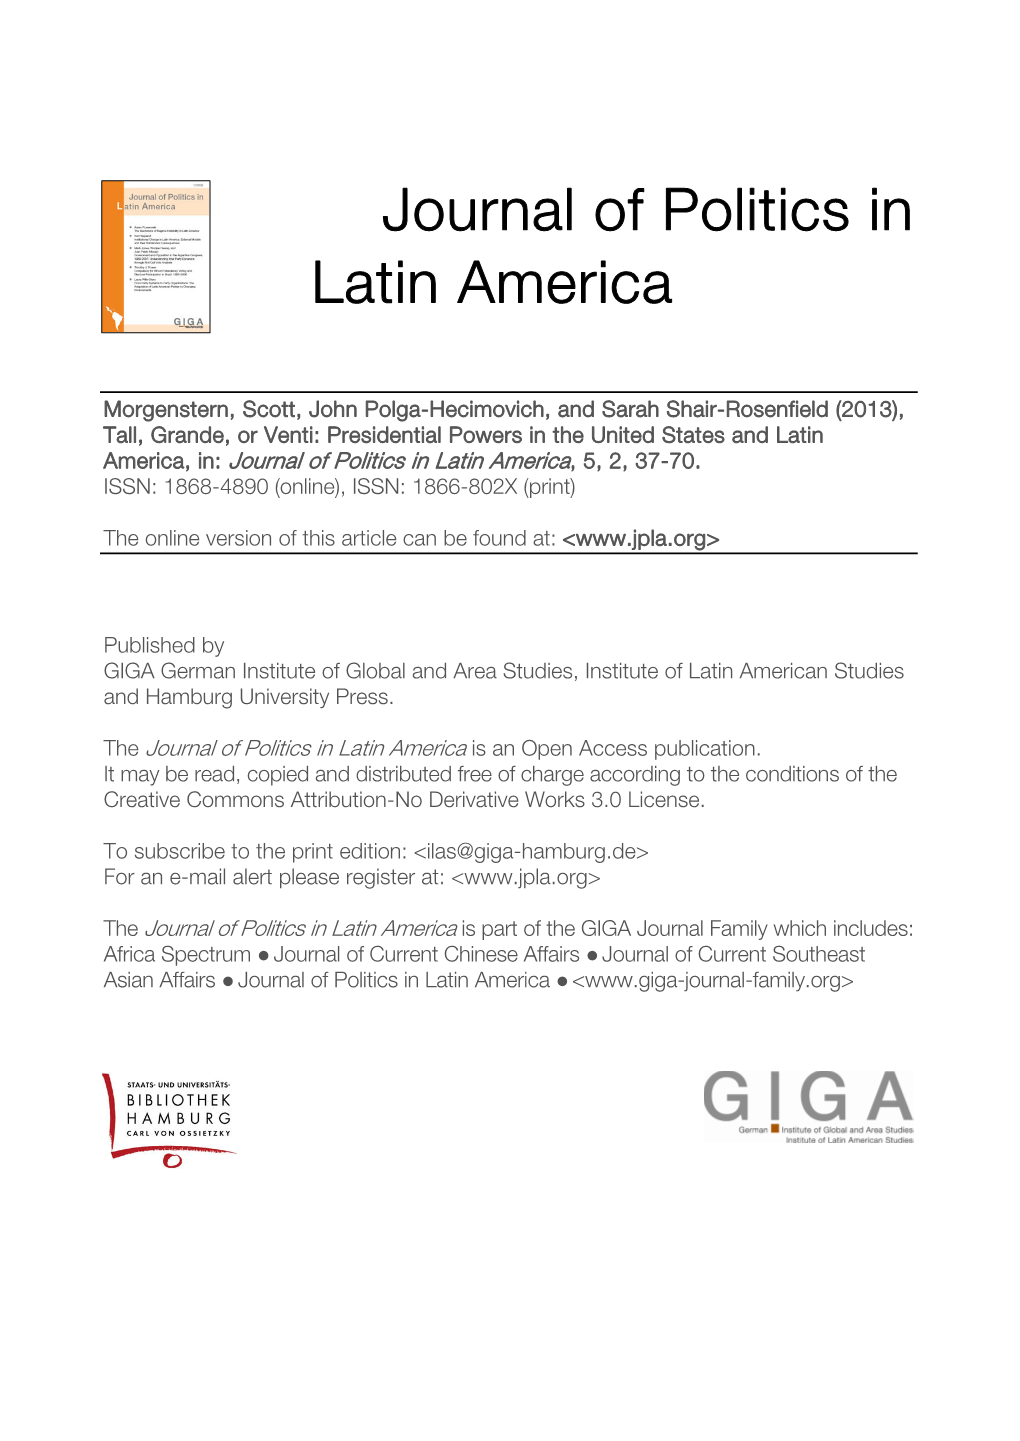 Presidential Powers in the United States and Latin America, In: Journal of Politics in Latin America, 5, 2, 37-70